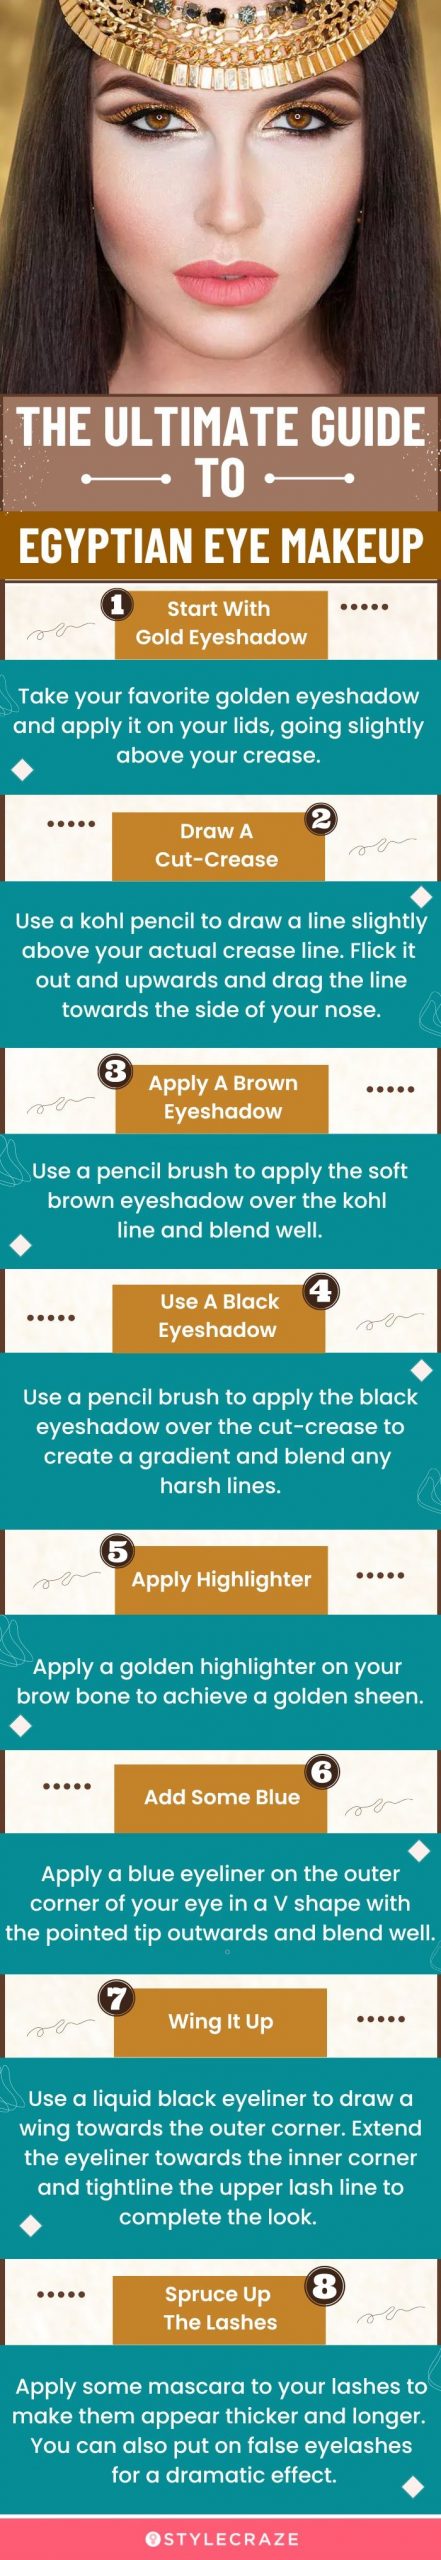 the ultimate guide to egyptian eye makeup (infographic)